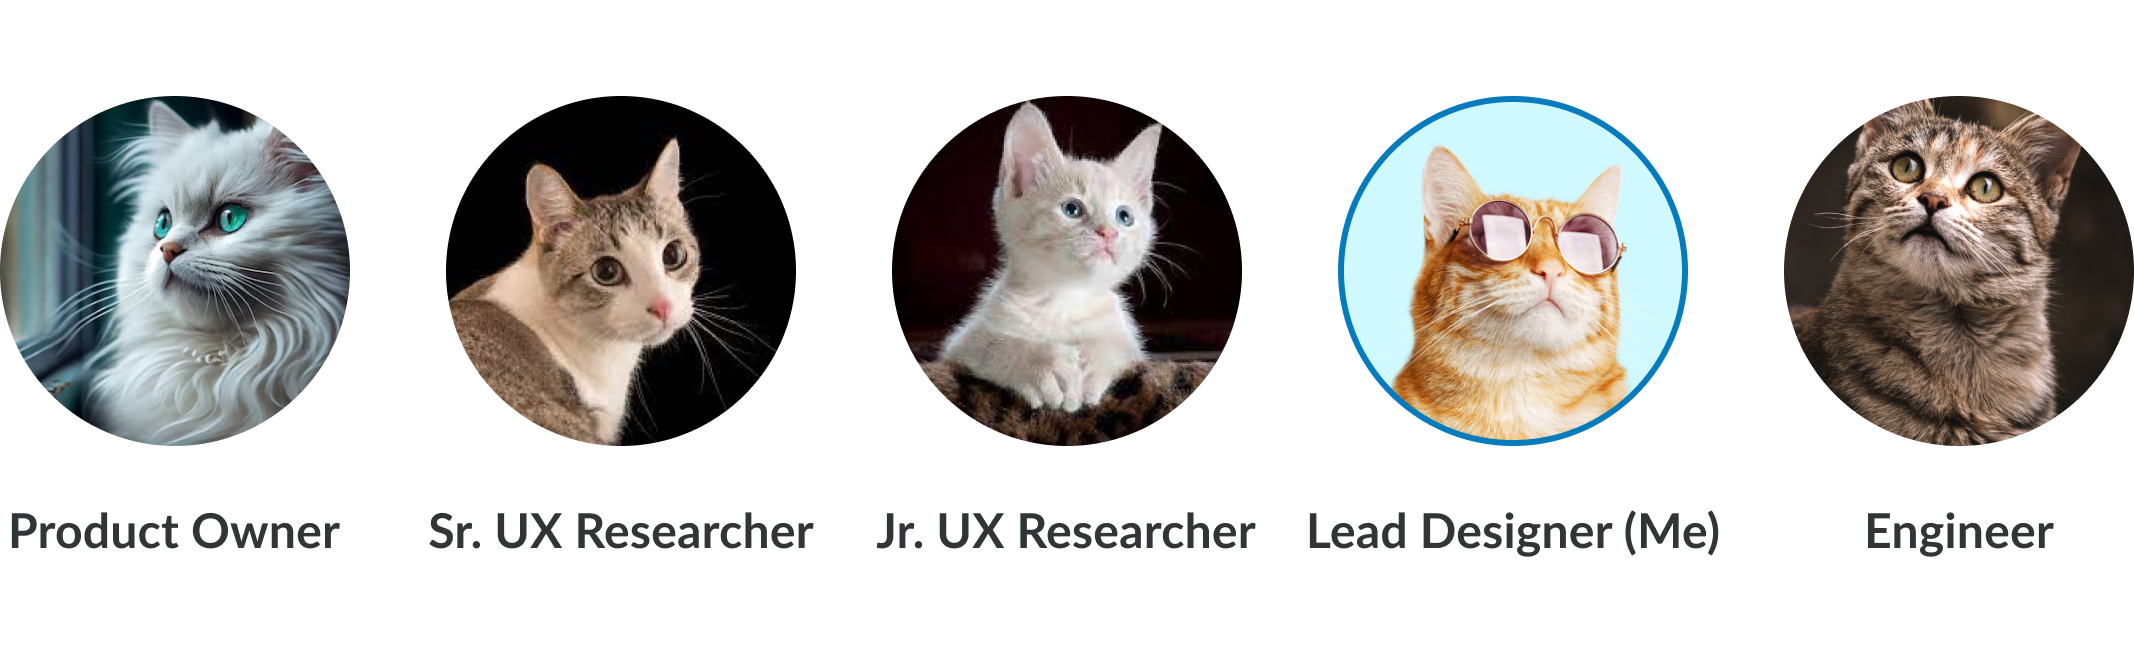 Project team represented as cats